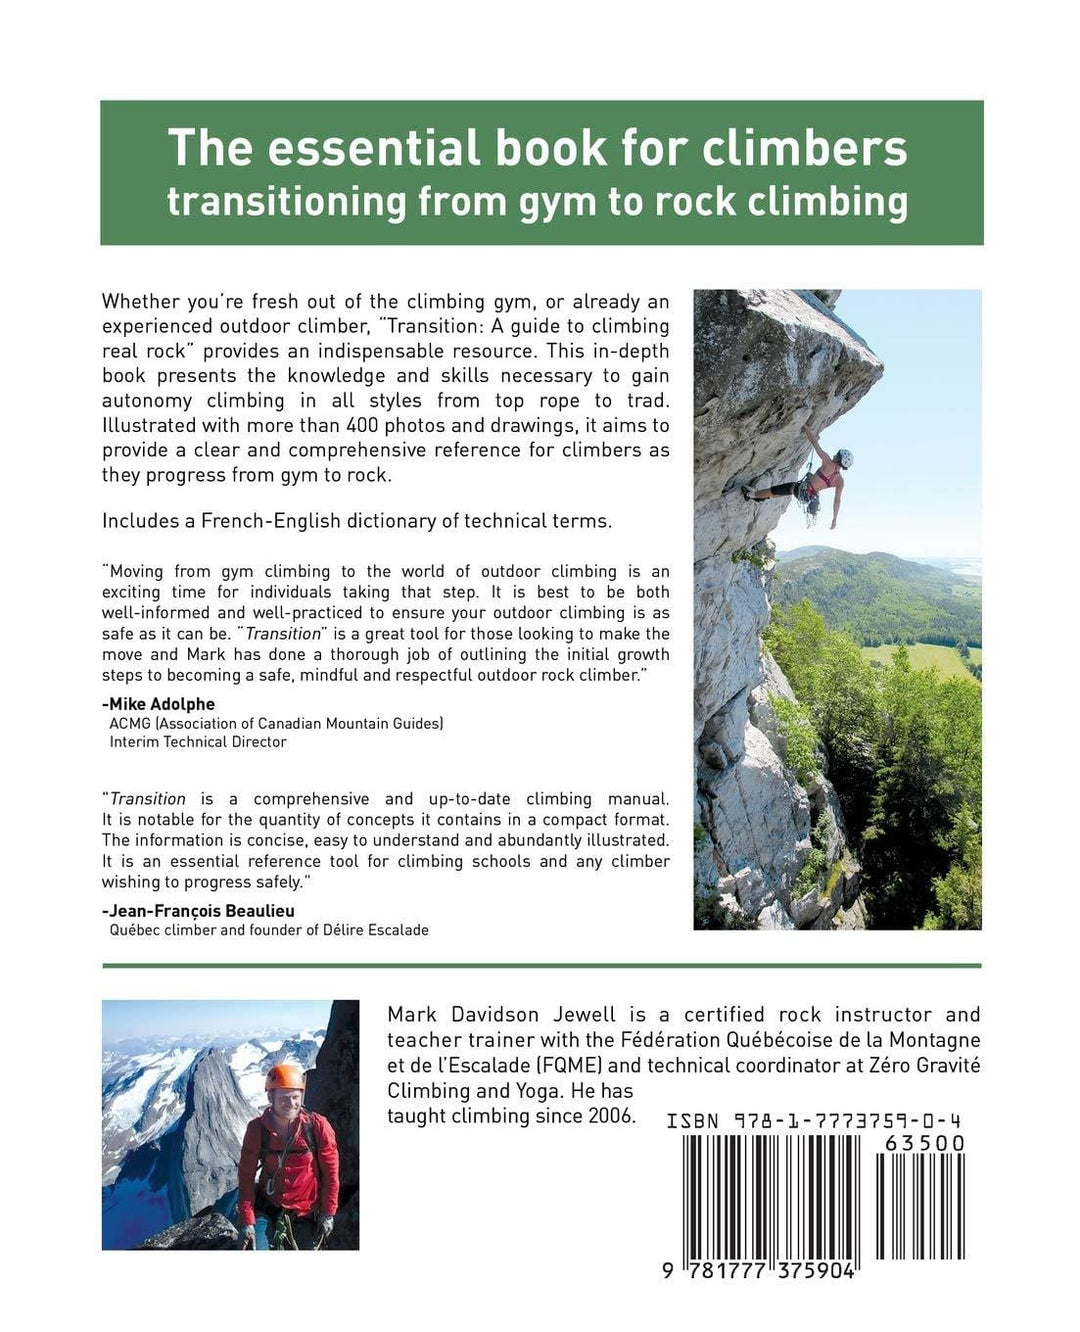 Jewel Climbing Transition: A guide to climbing real rock